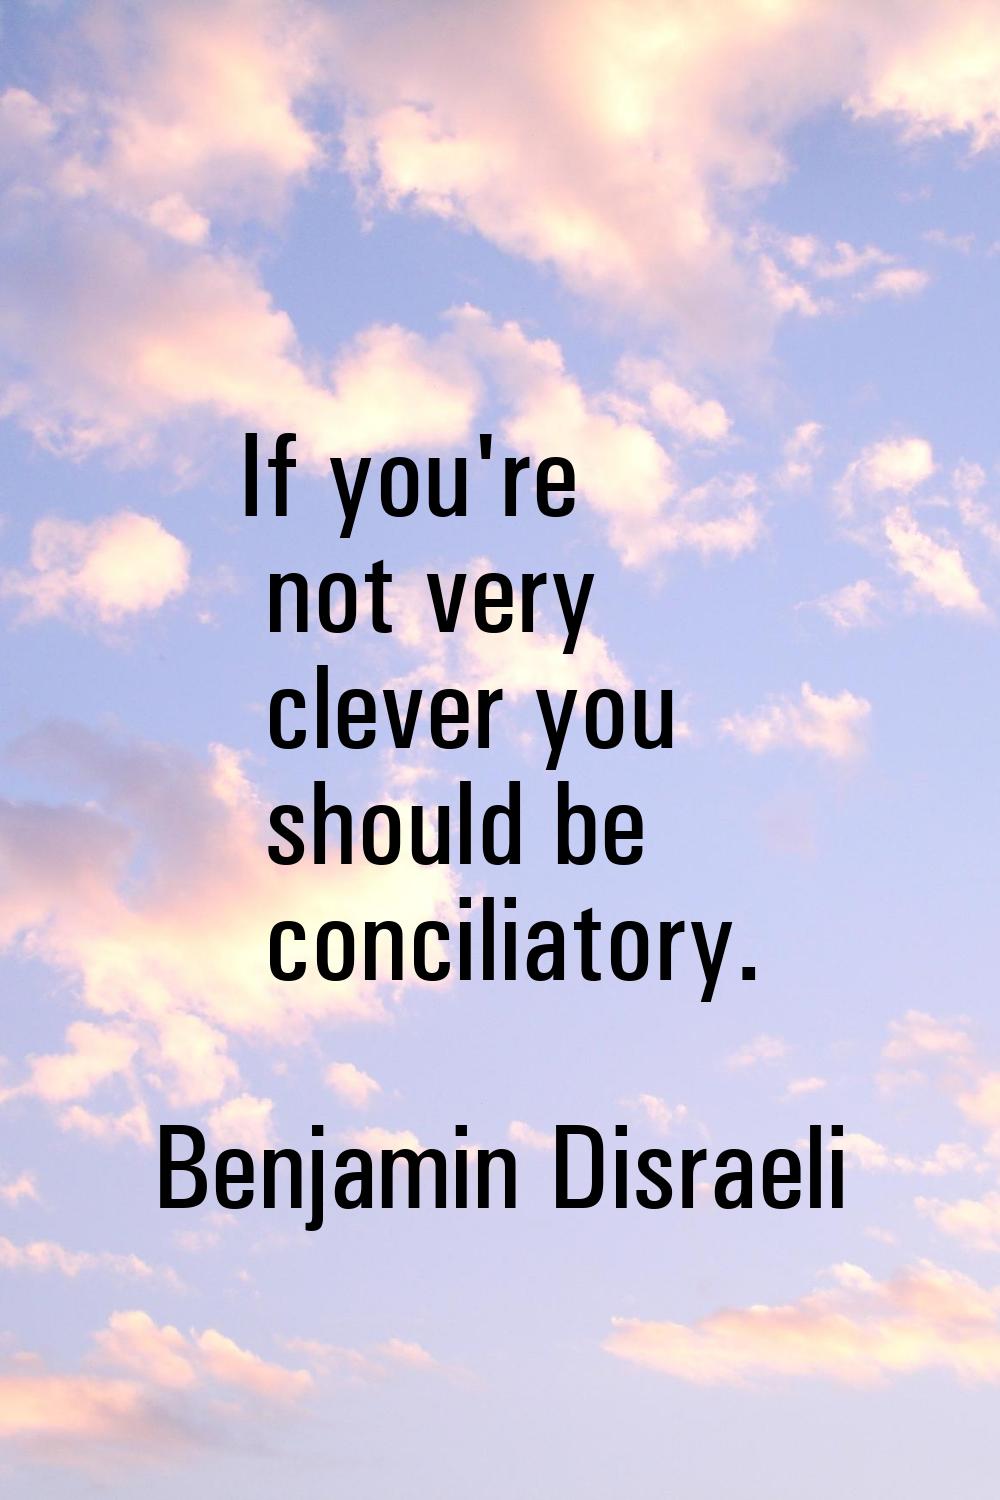 If you're not very clever you should be conciliatory.